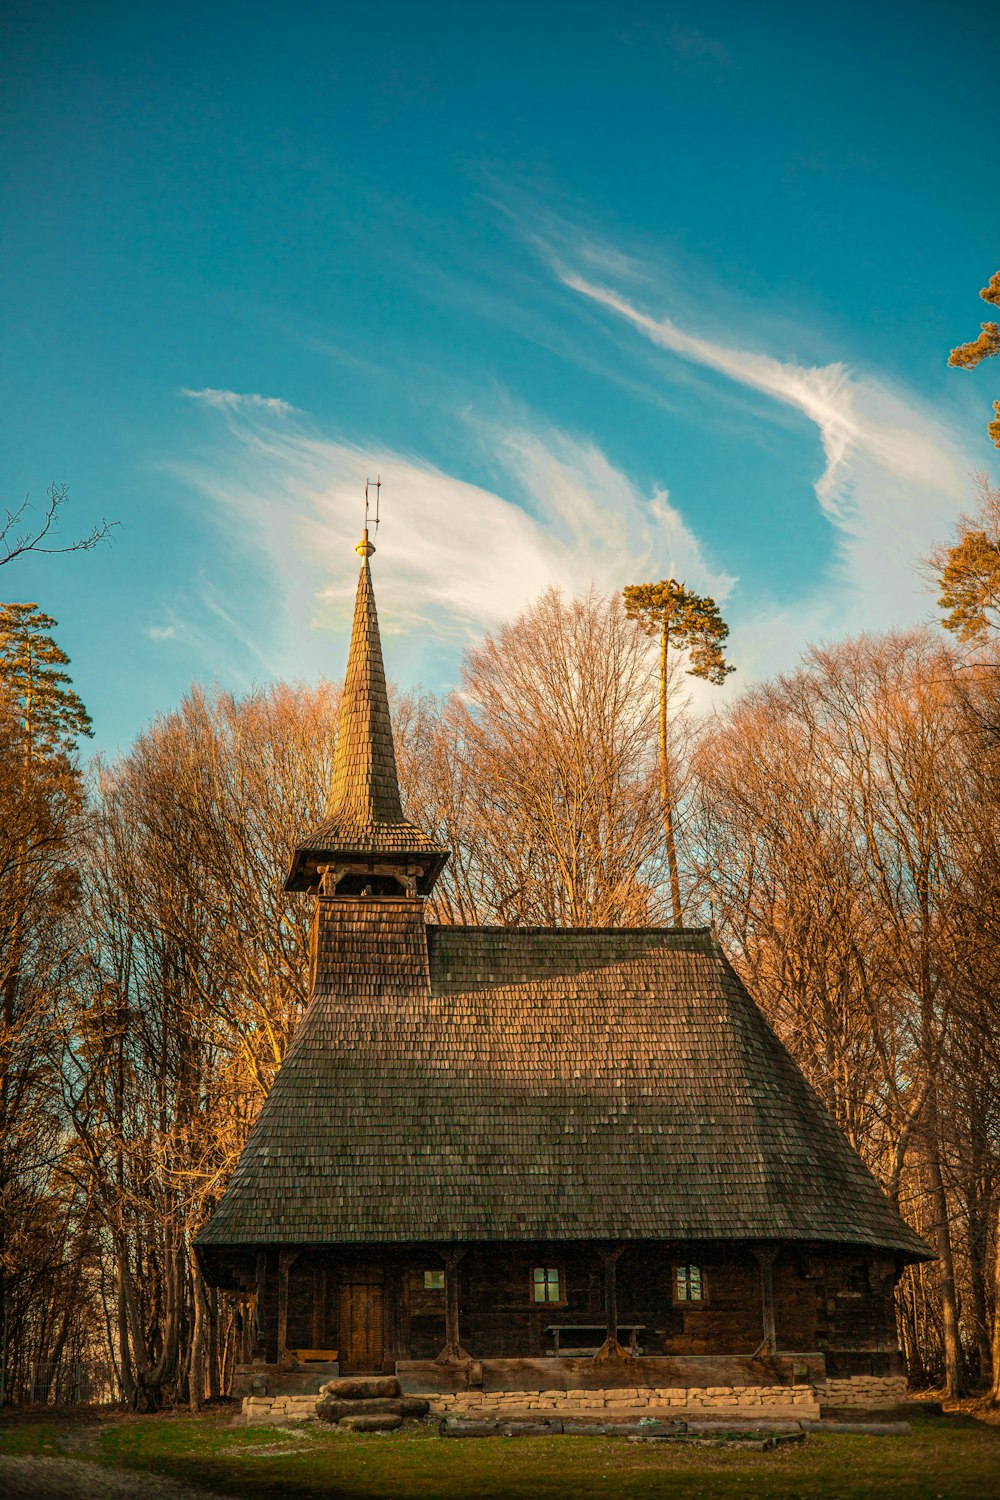 an old wooden church with a steeple surrounded by trees